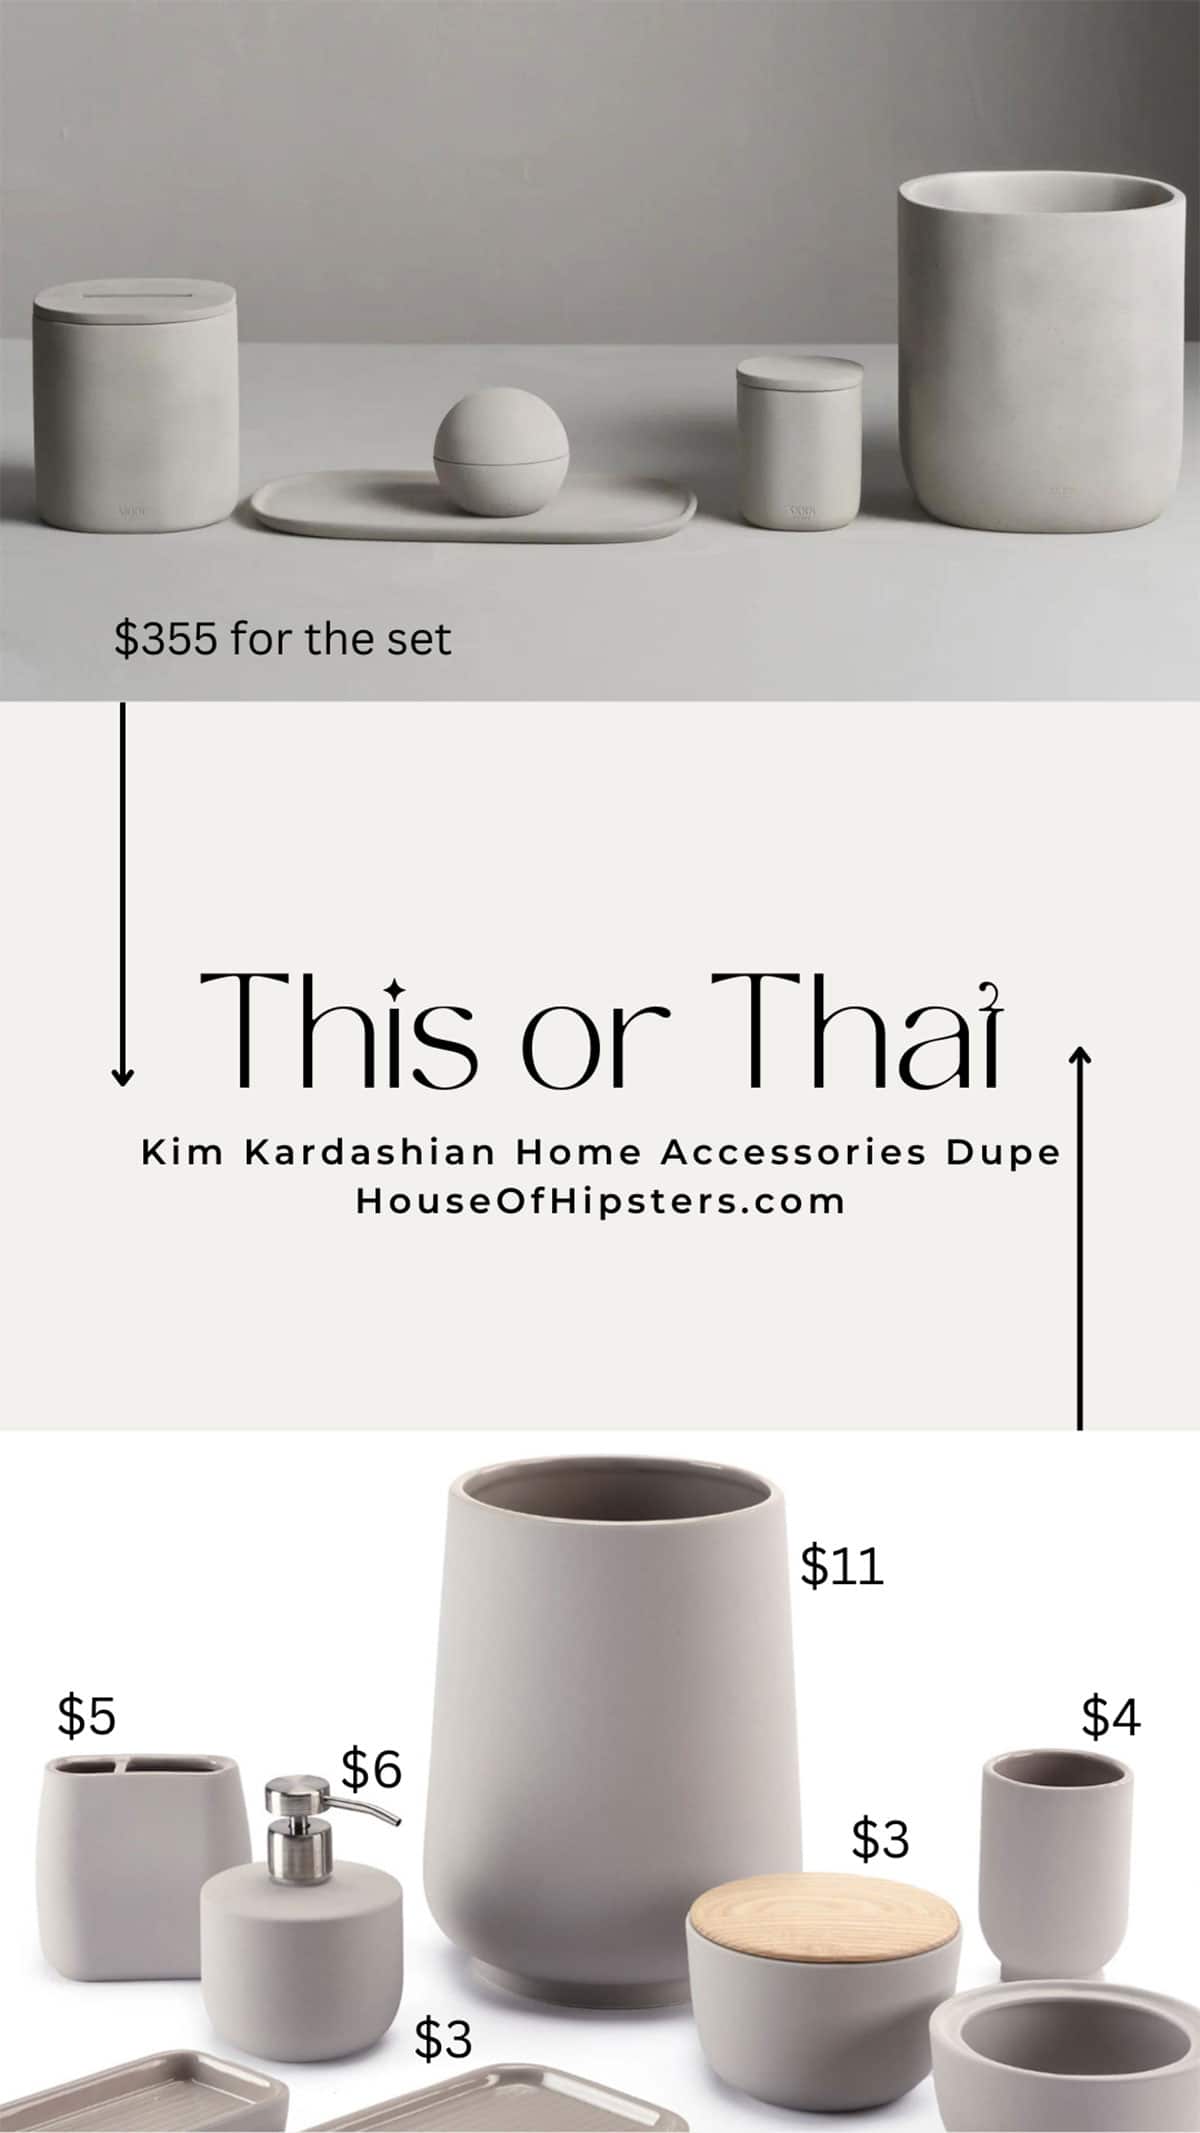 SKKN by Kim Home Decor Dupe for bathroom accessories